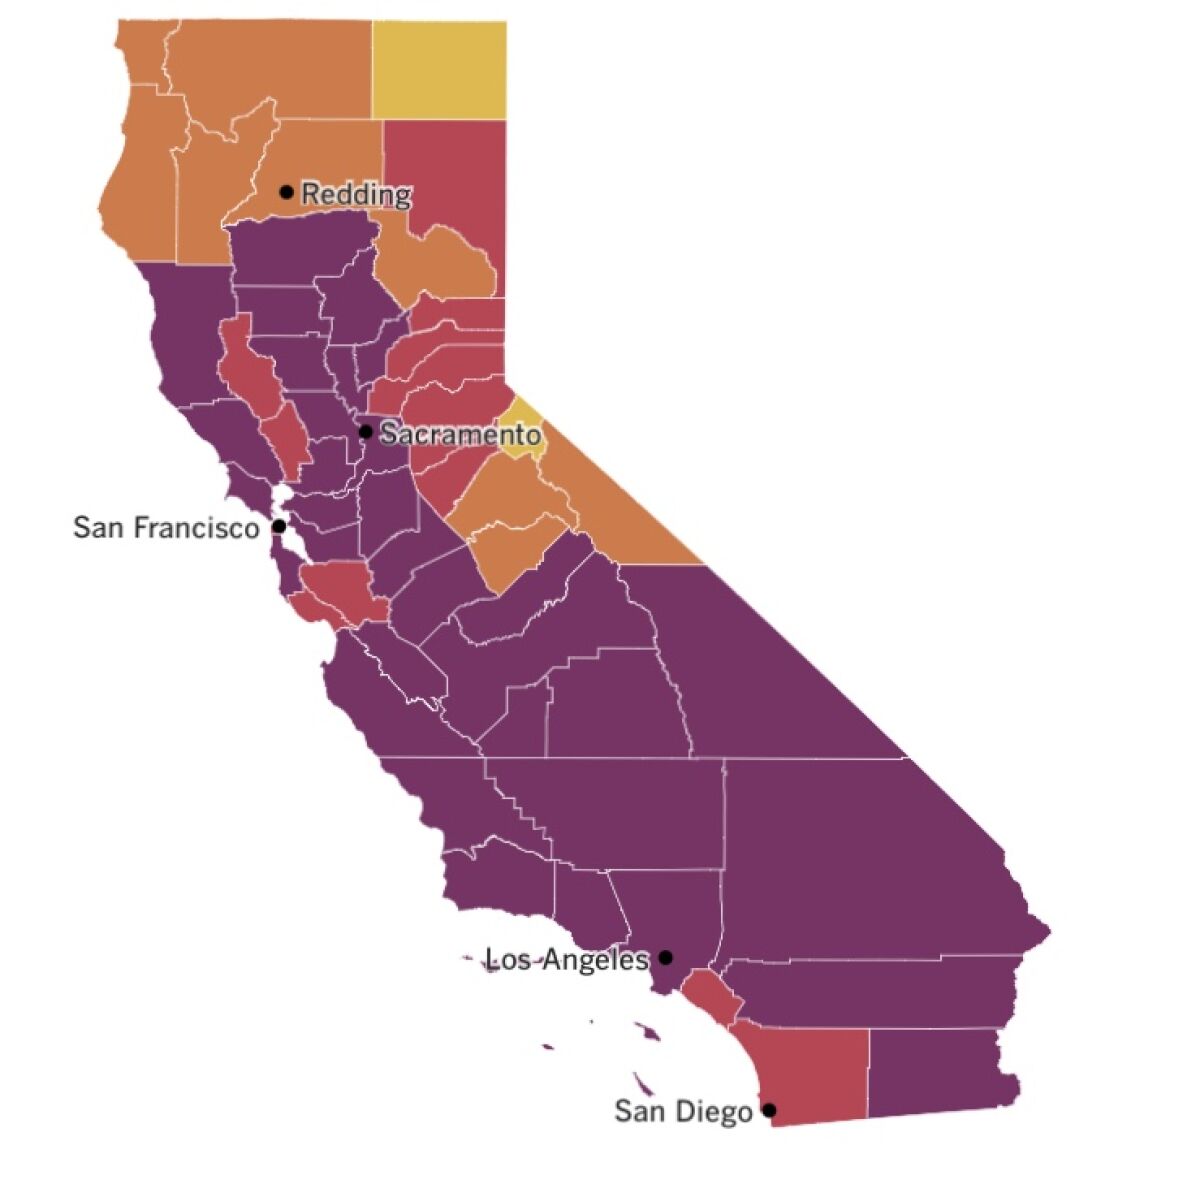 A map of California shows most counties in purple Tier 1 for reopening, representing widespread virus transmission